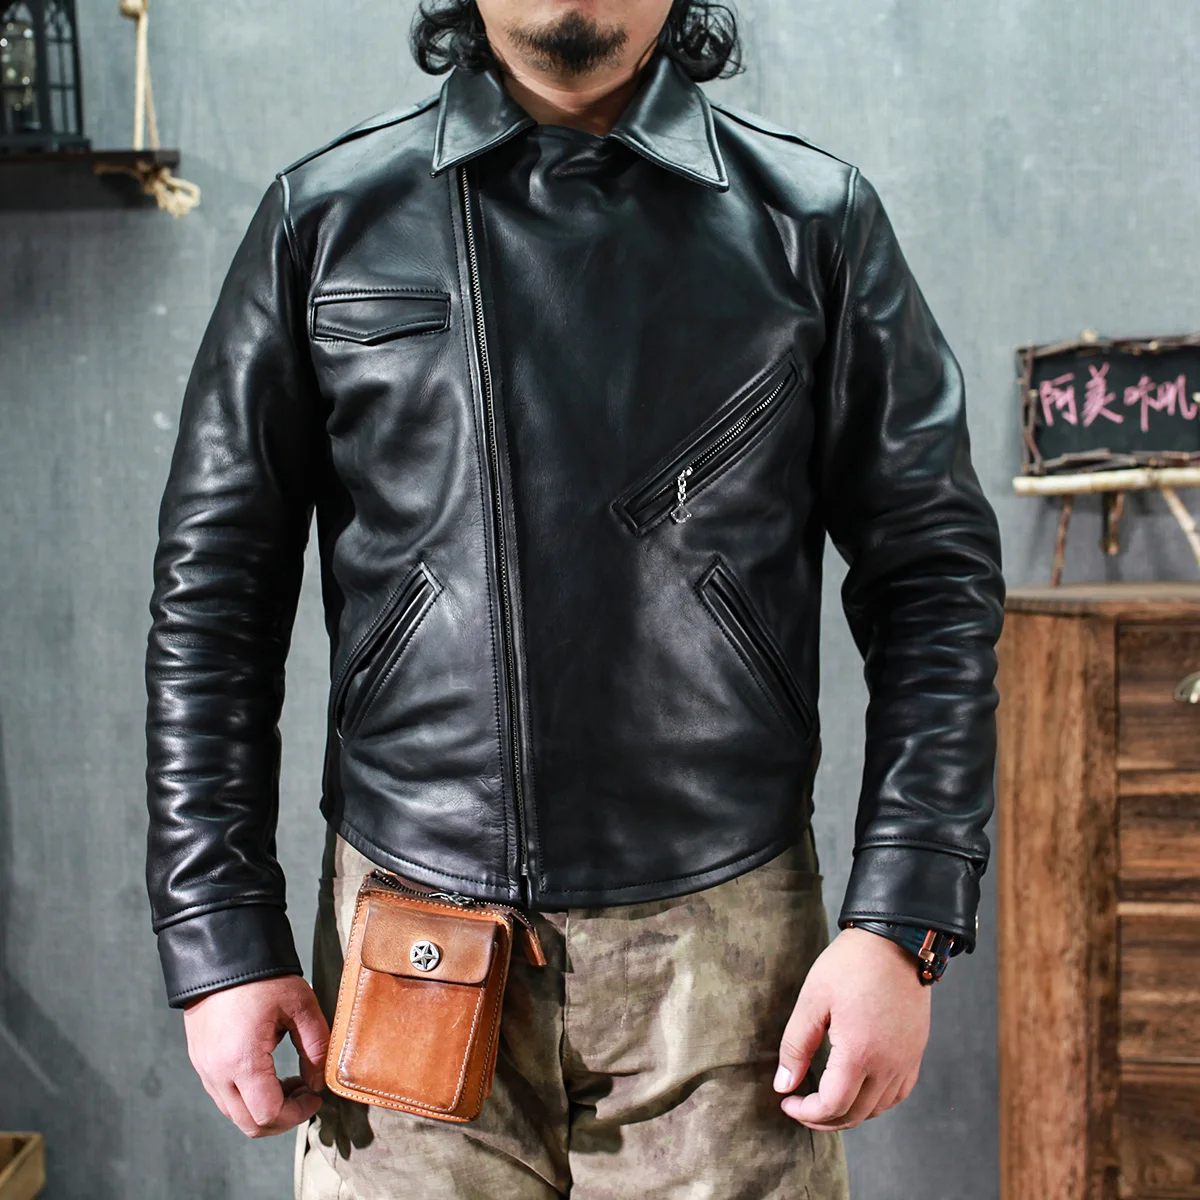 

SDC1300 Super Top Quality Heavy Genuine 1.5mm Japan Veg Tanned Cow Leather Slim Classic Cowhide Stylish Rider Jacket